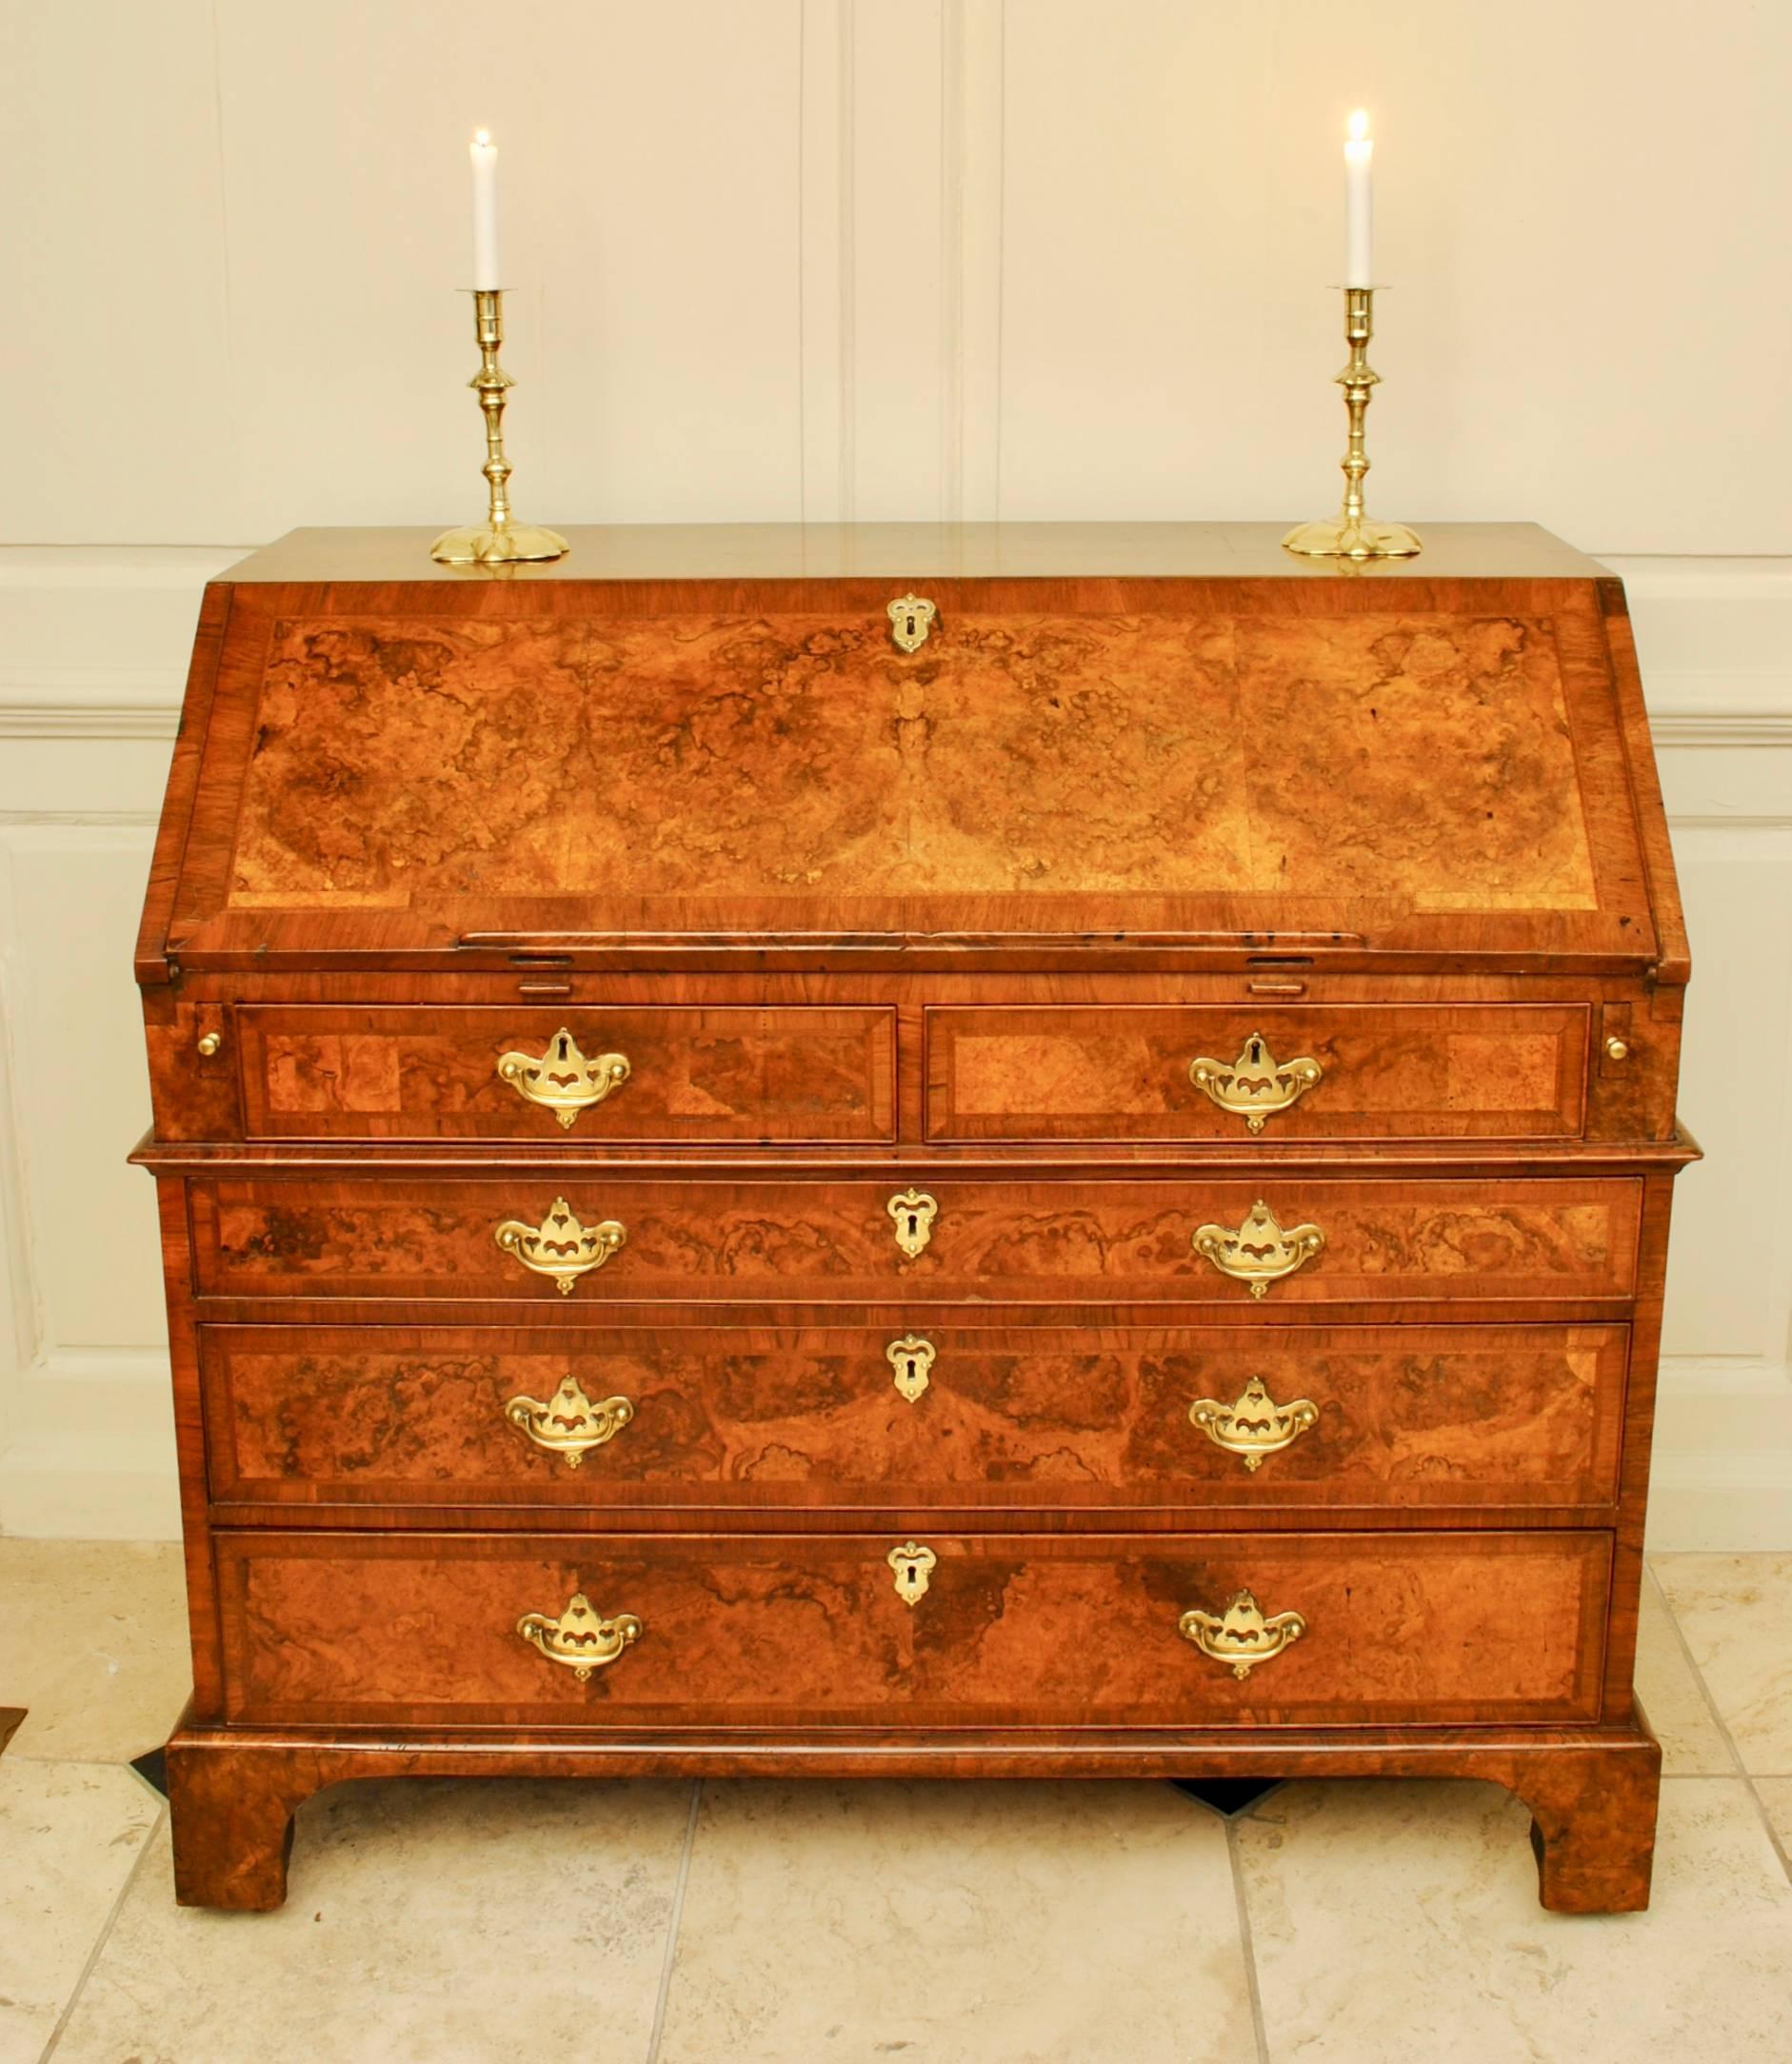 A handsome example of a burr walnut bureau with herringbone bandings and cross grain waist mouldings retaining the fine original set of brass handles. Standing on the original bracket feet with castors and with carrying handles to the side. Superb